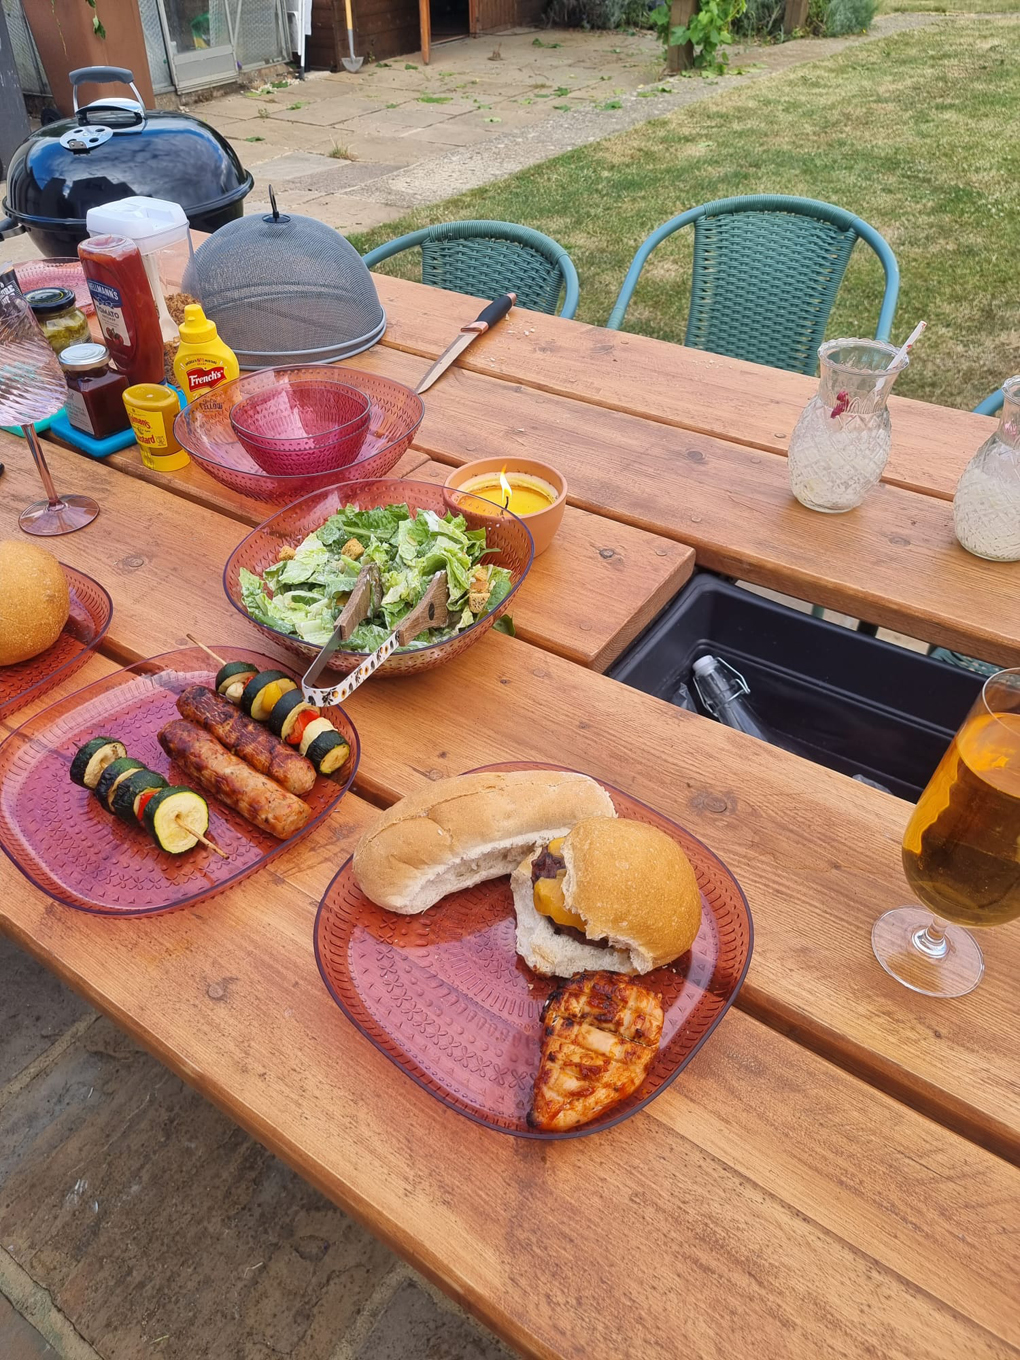 BBQ food spread over an outside table